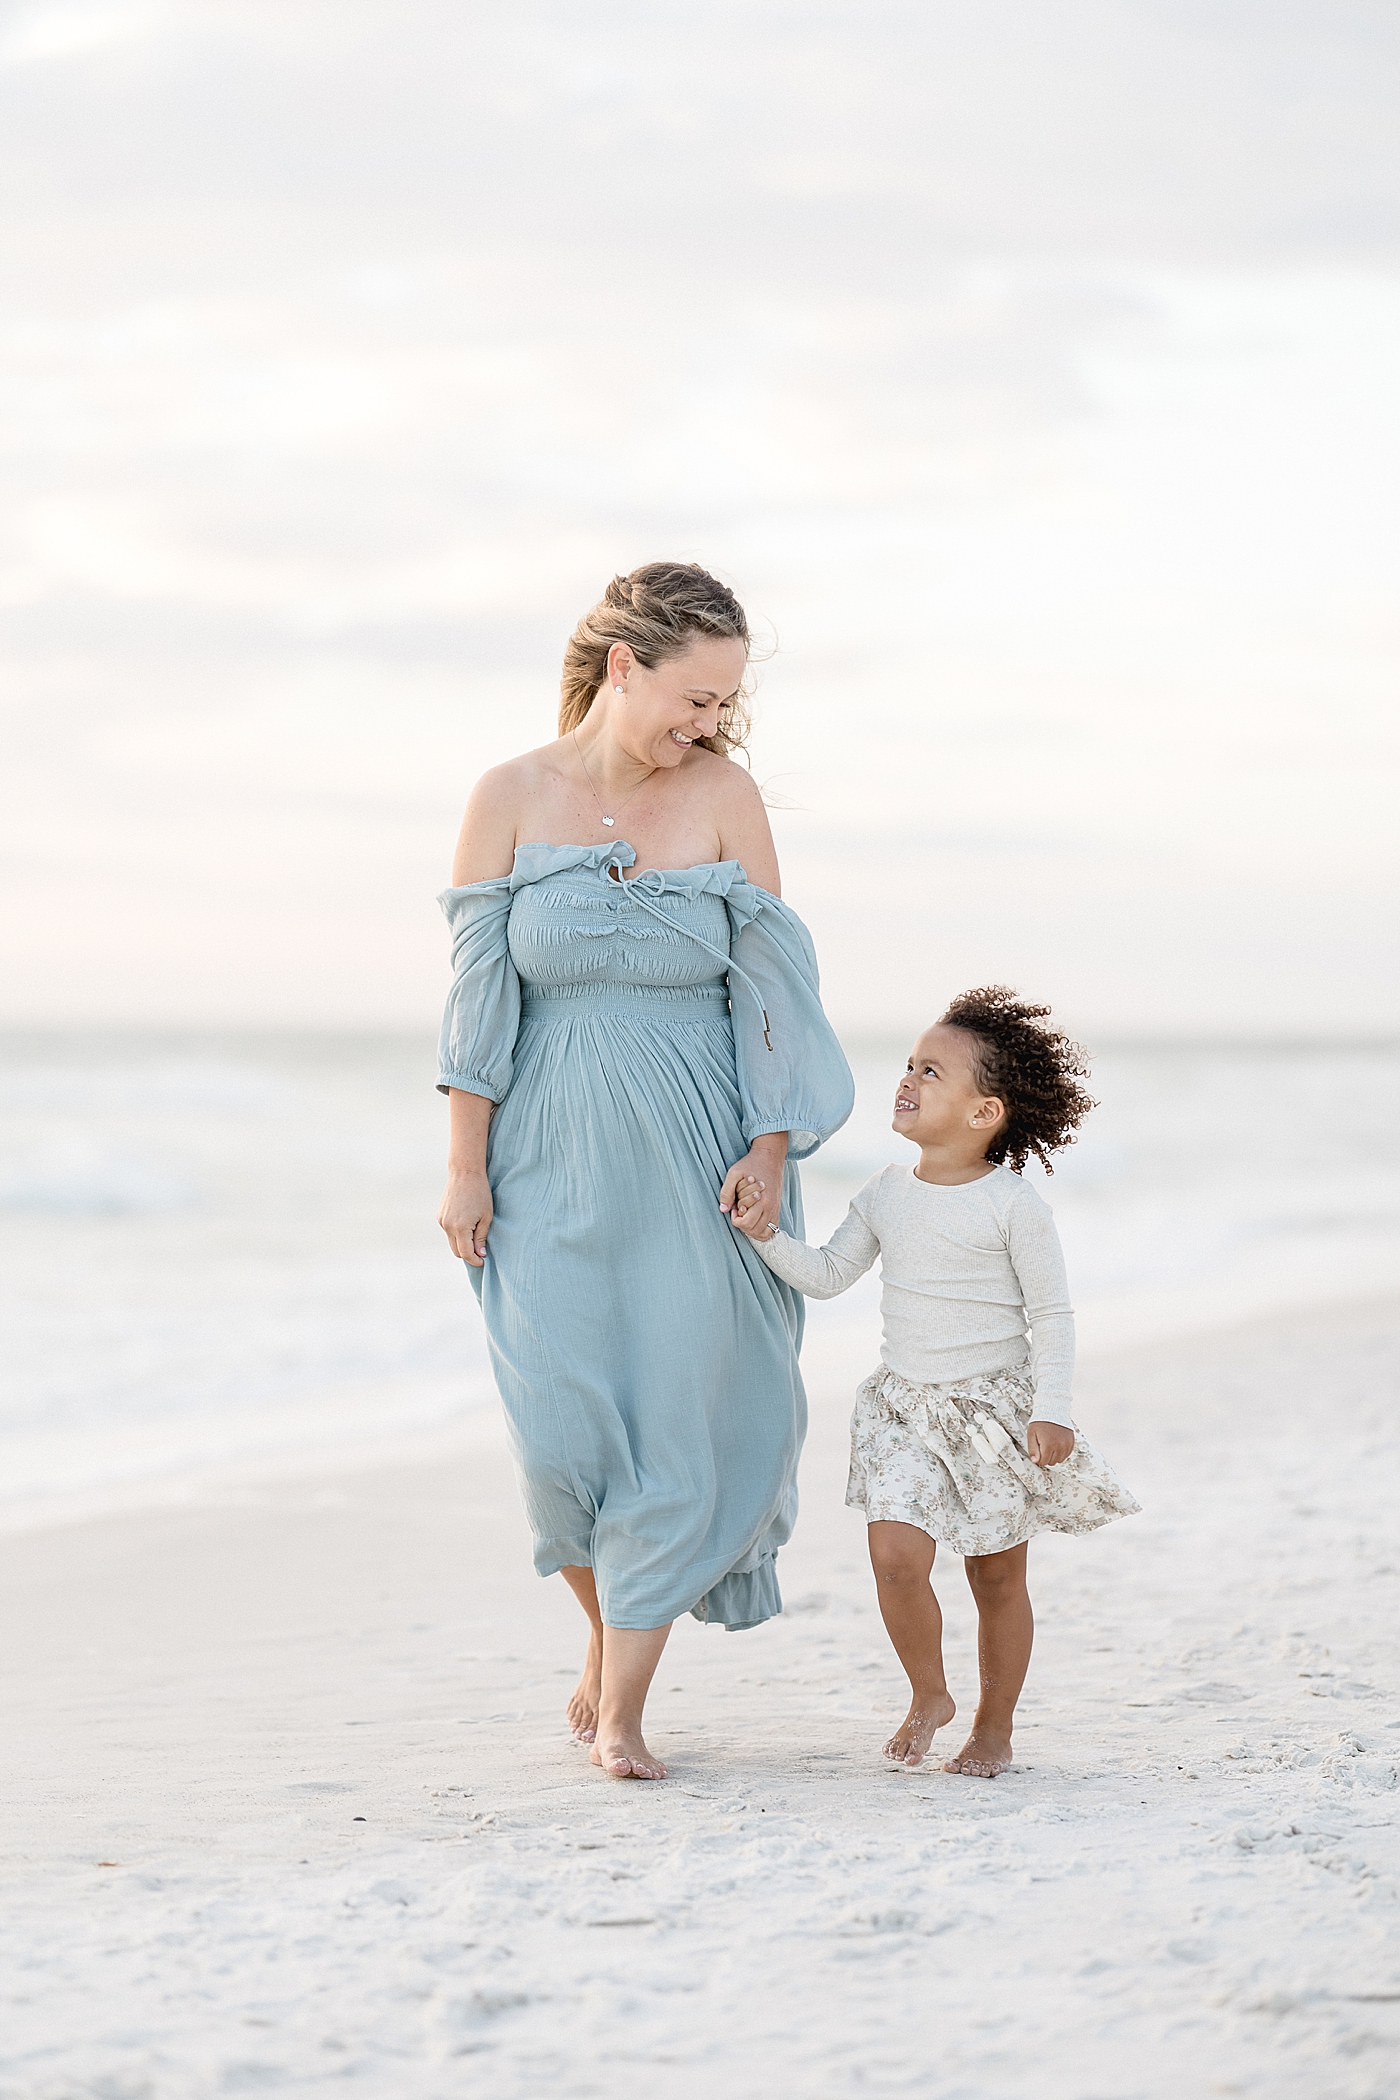 Mom walking with her daughter on the beach. Photo by Brittany Elise Photography.